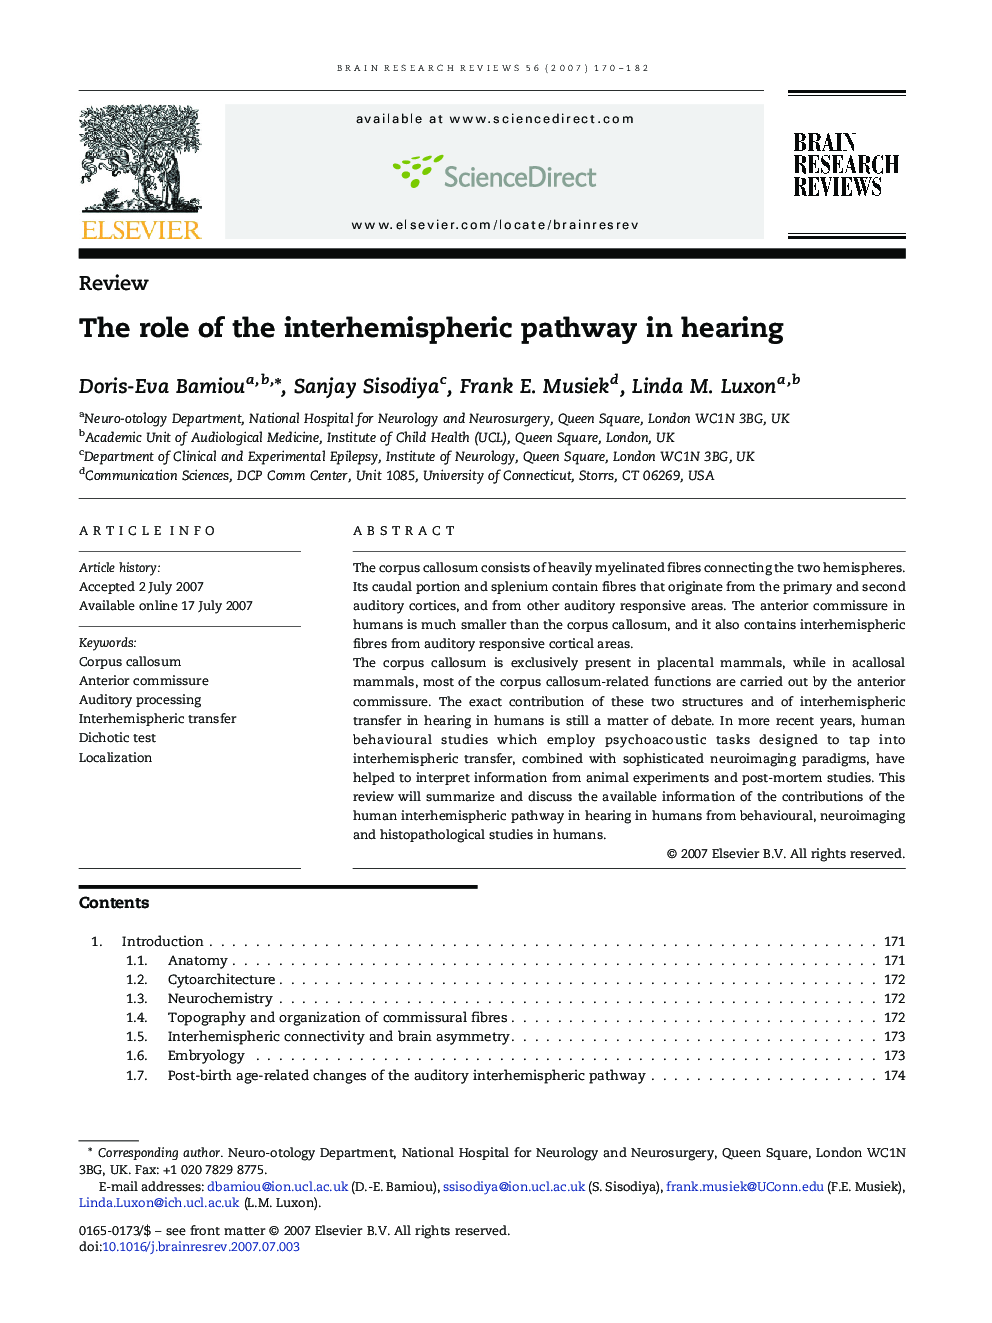 The role of the interhemispheric pathway in hearing